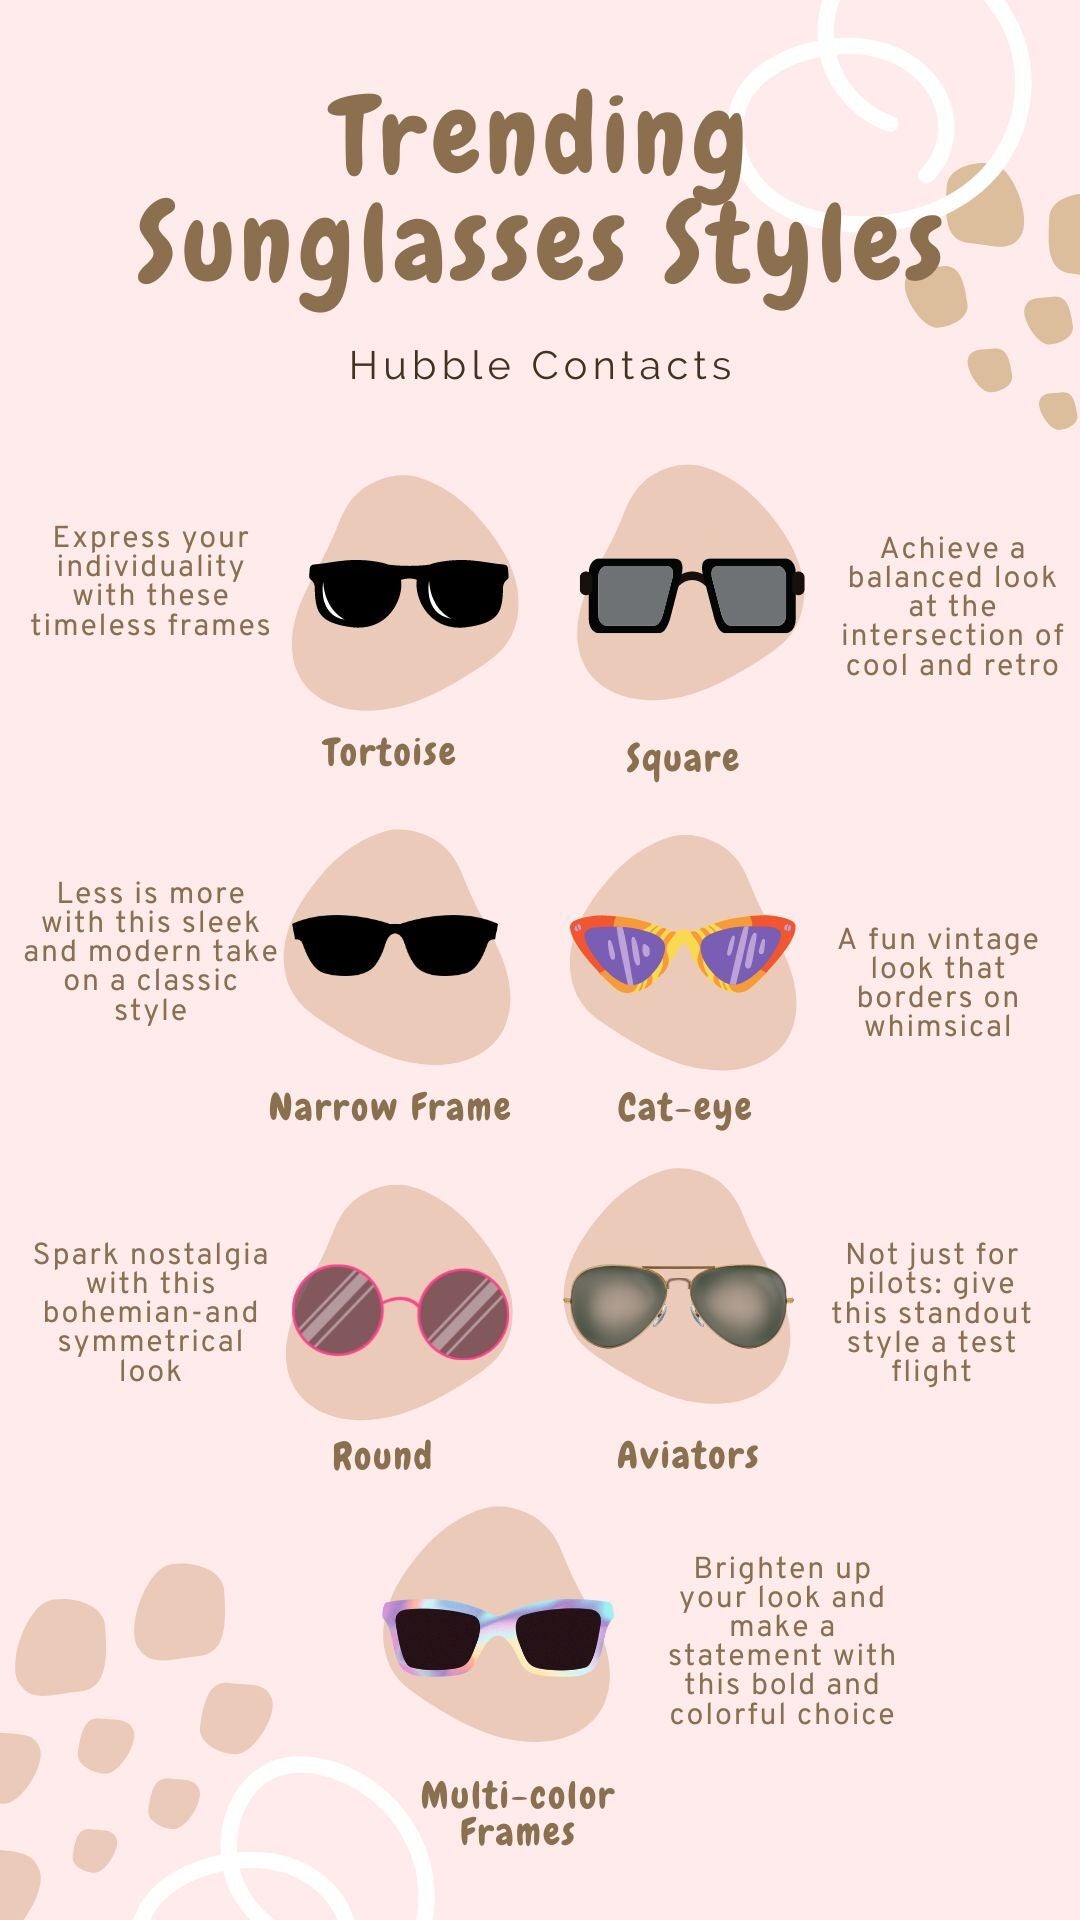 Look bougie on a budget with 5 branded sunglasses for men